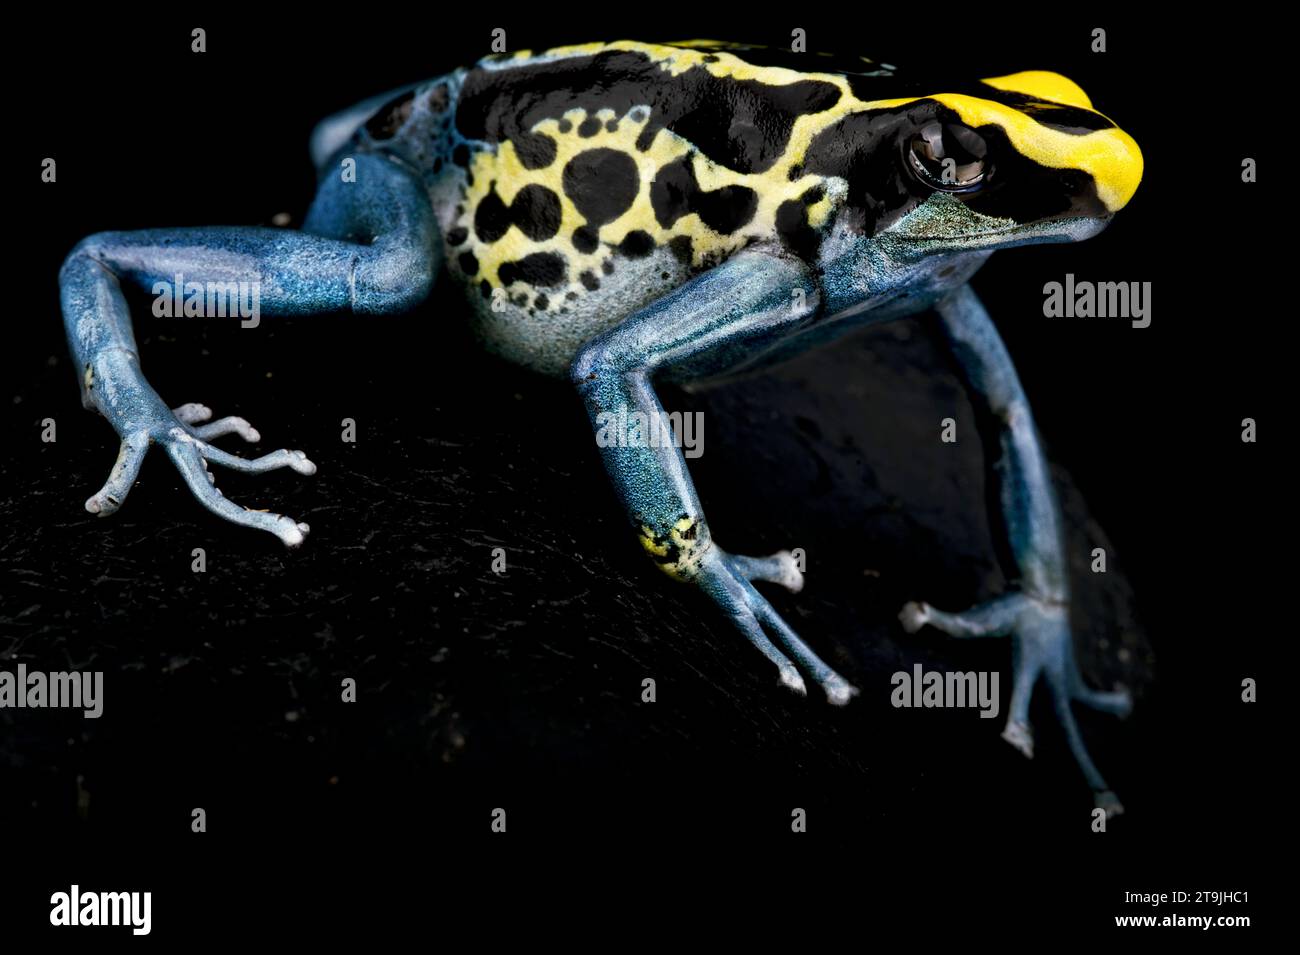 The Dyeing dart frog (Dendrobates tinctorius) is a big, colorful frog species from the Guiana shield in South America. Stock Photo